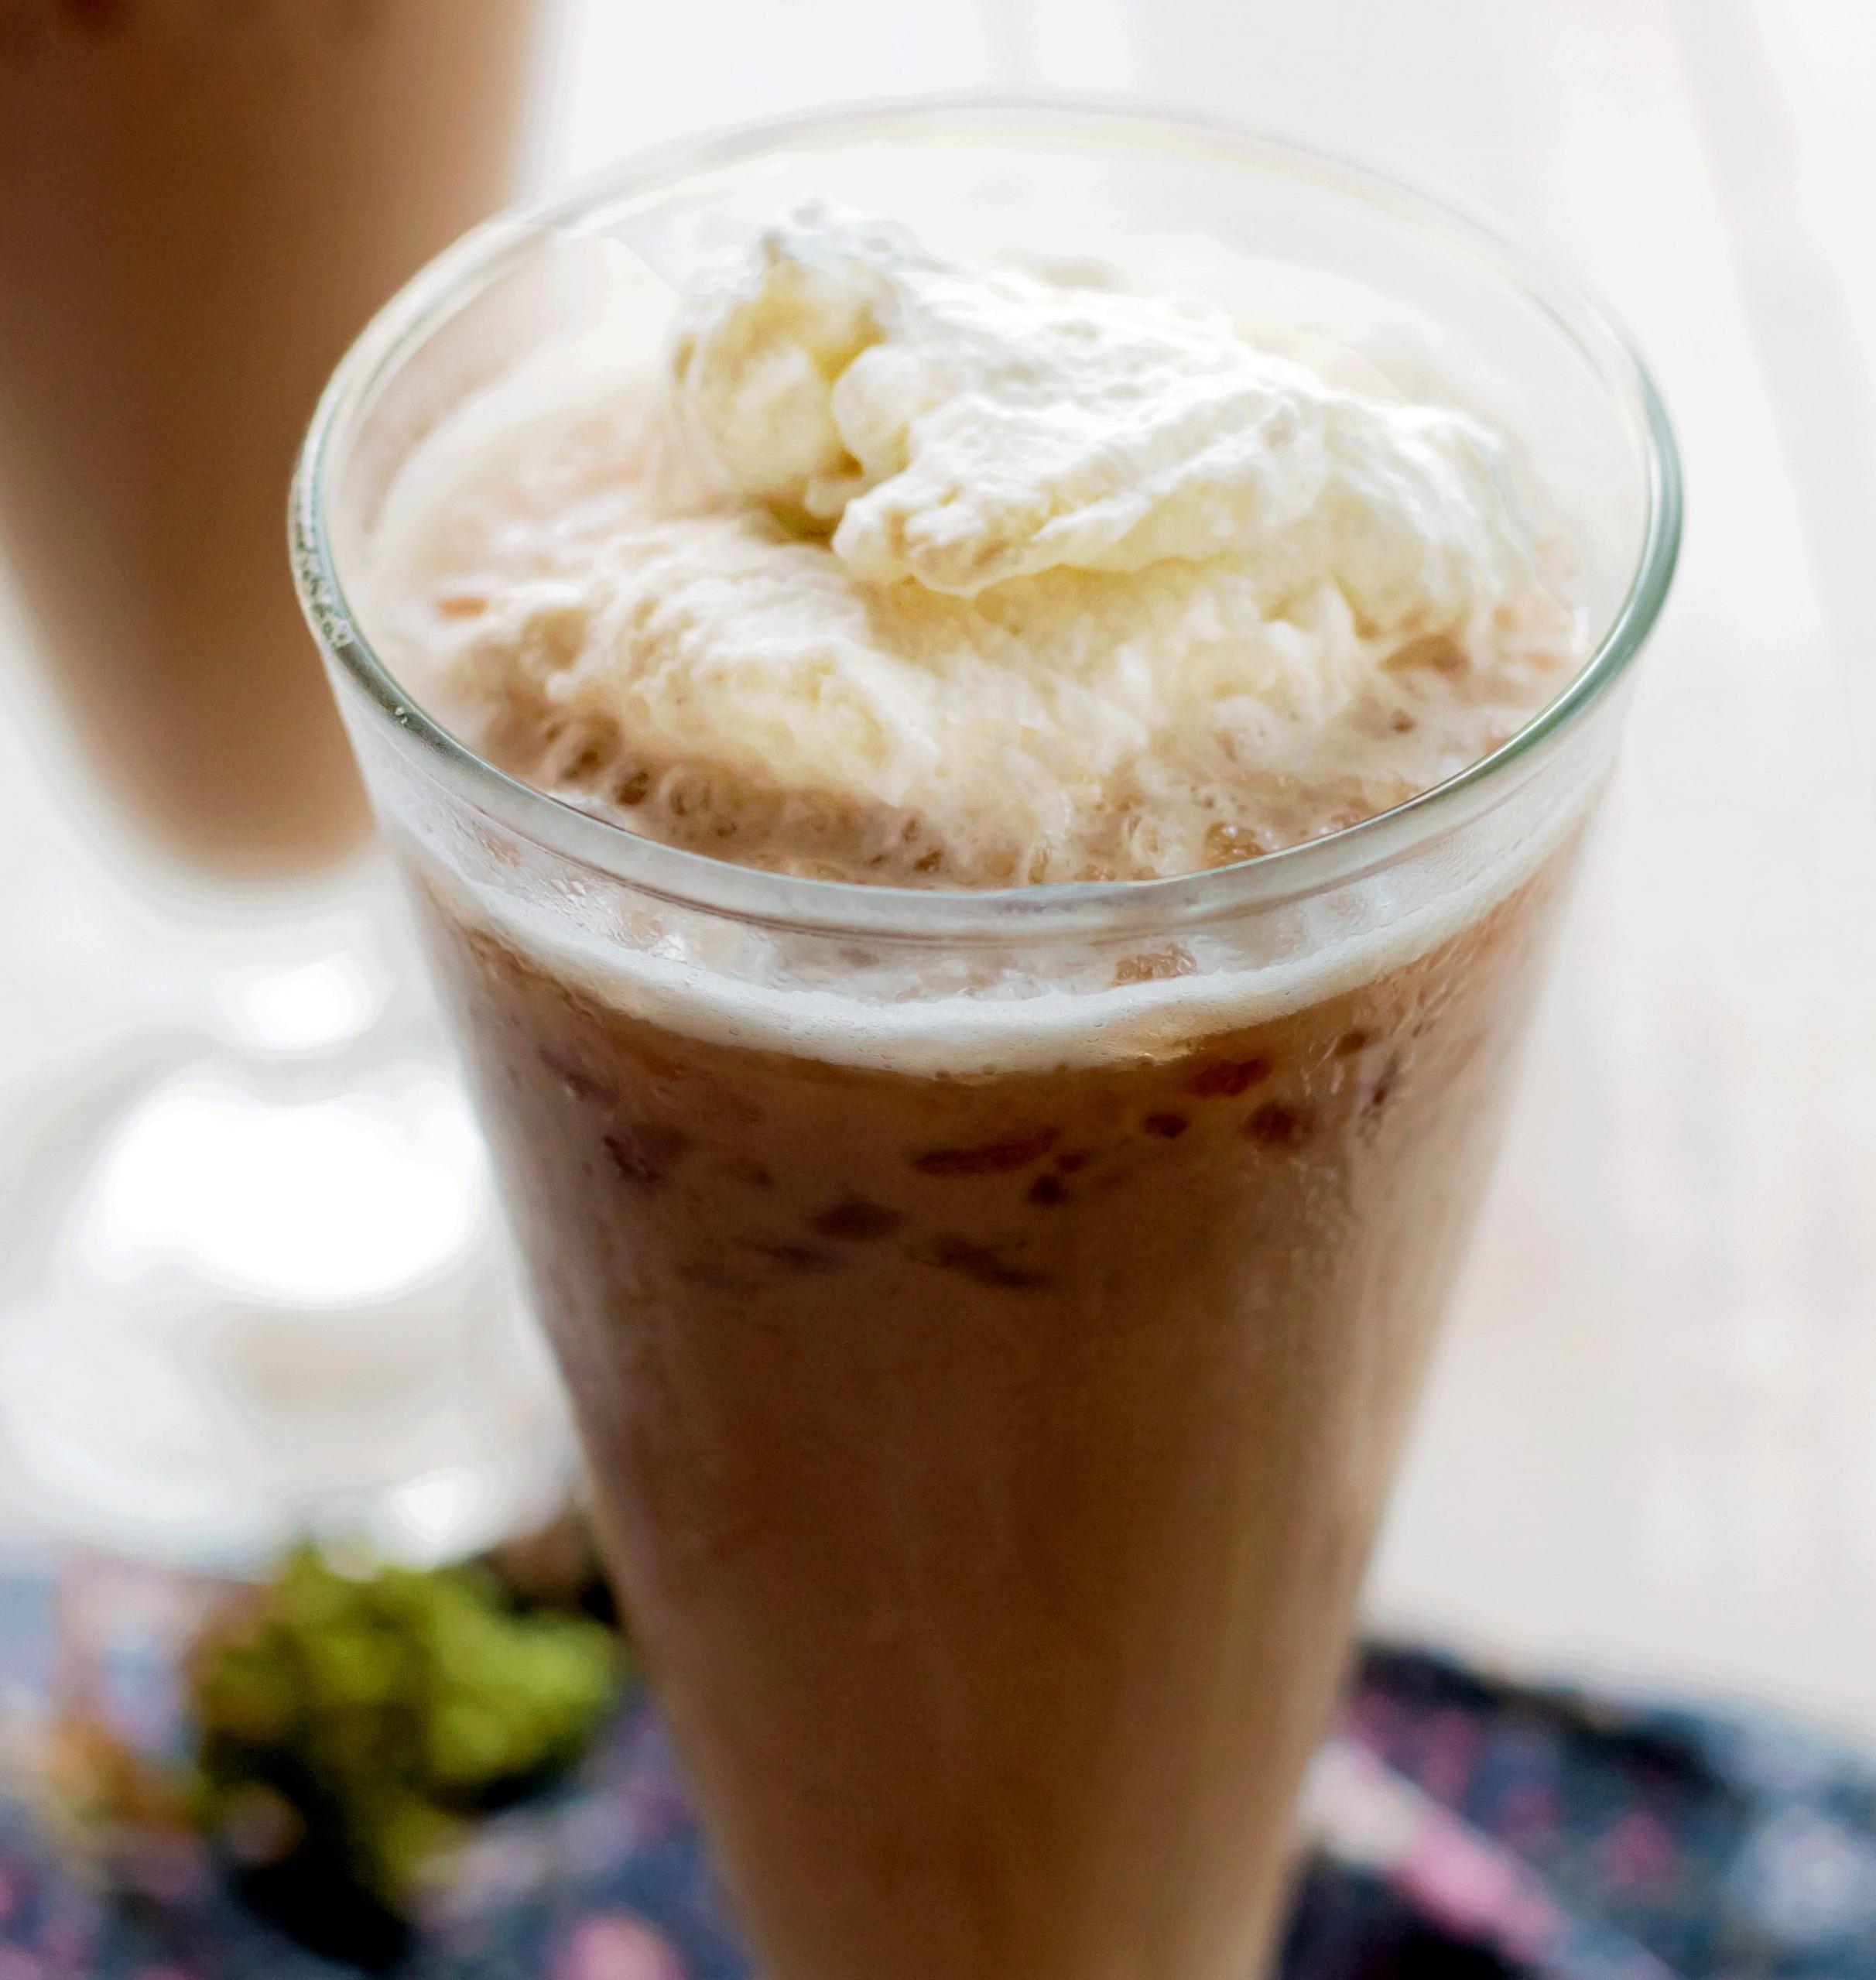  Who needs a basic iced coffee when you can have a hazelnut cooler?